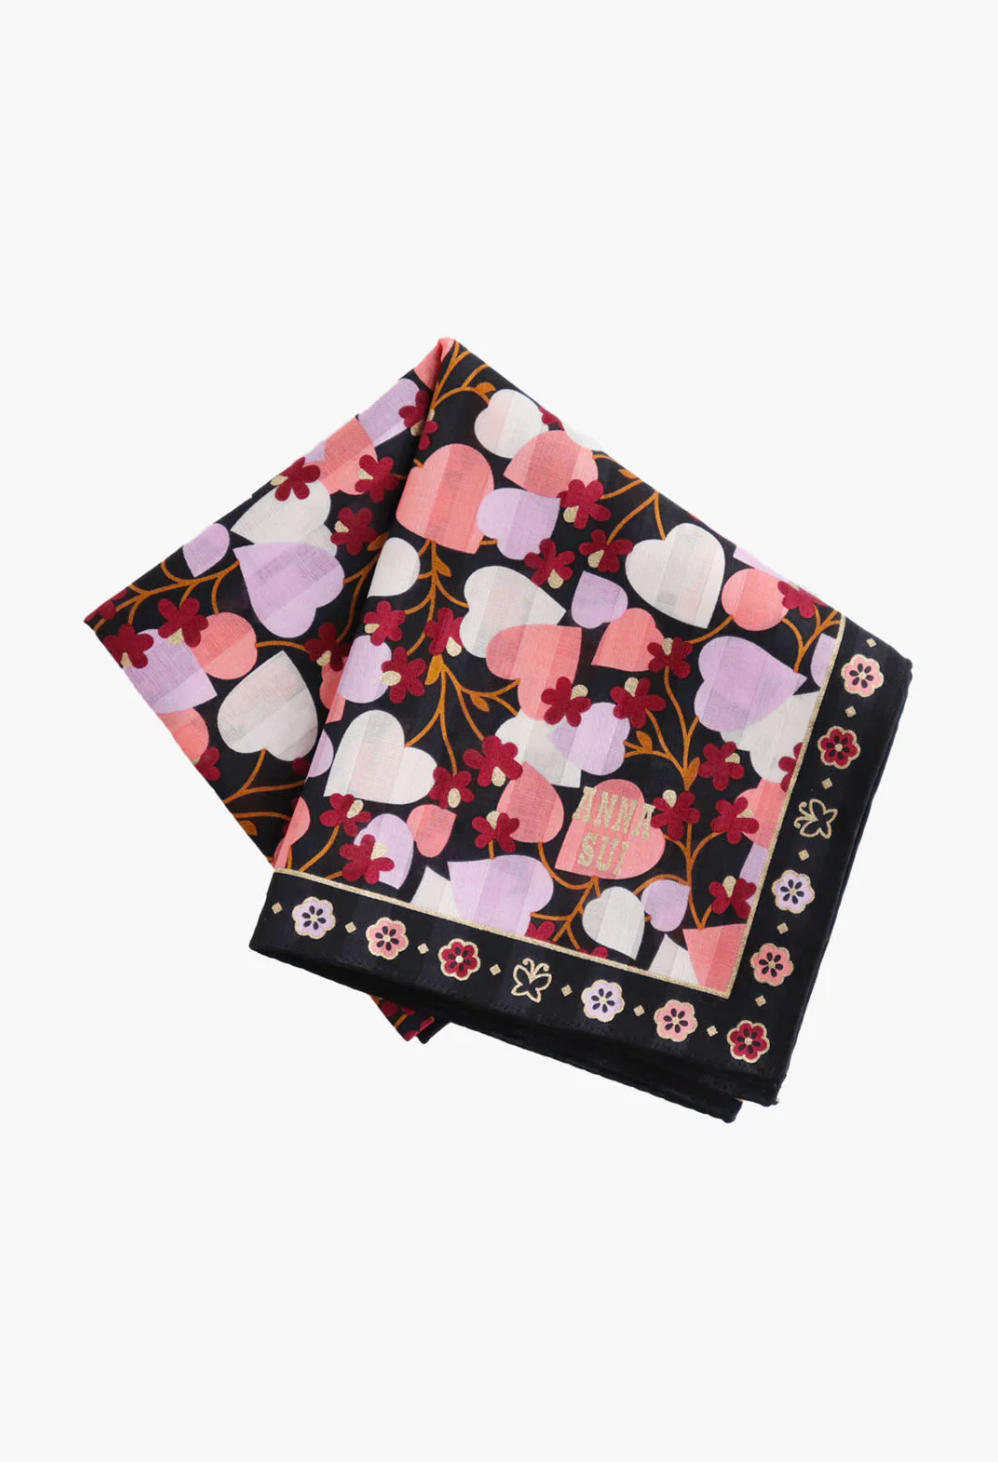 Handkerchief printed color, Anna Sui label, blooming stylized hearts in pink/burgundy, black border